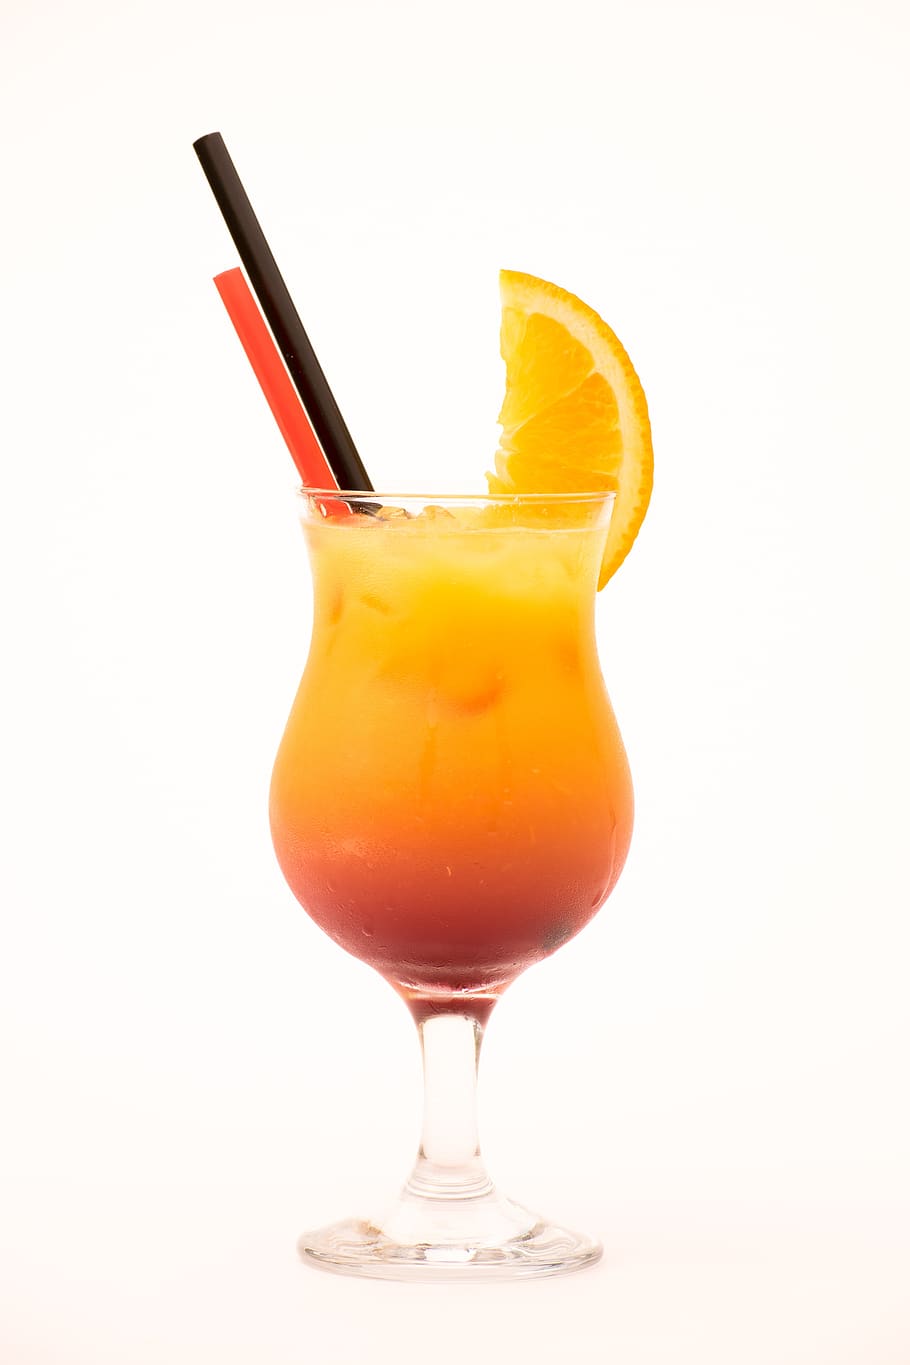 glass, orange, juice, drink, healthy, alcohol, cocktail, fresh, refreshment, cold